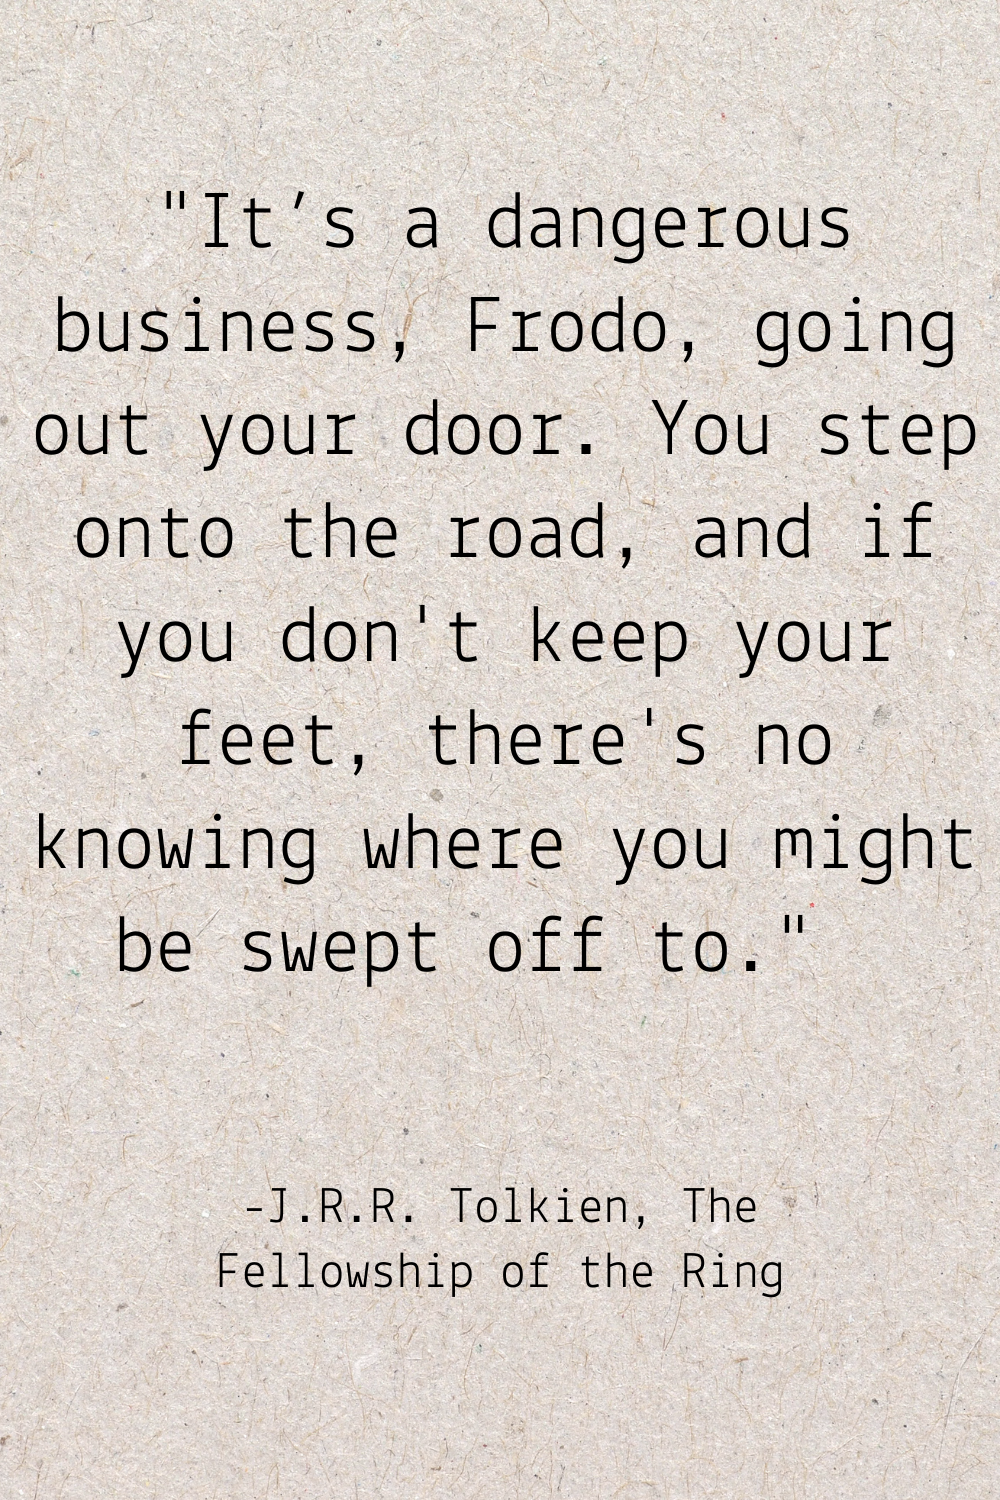 "It’s a dangerous business, Frodo, going out your door. You step onto the road, and if you don't keep your feet, there's no knowing where you might be swept off to." - J.R.R. Tolien The Fellowship of the Ring